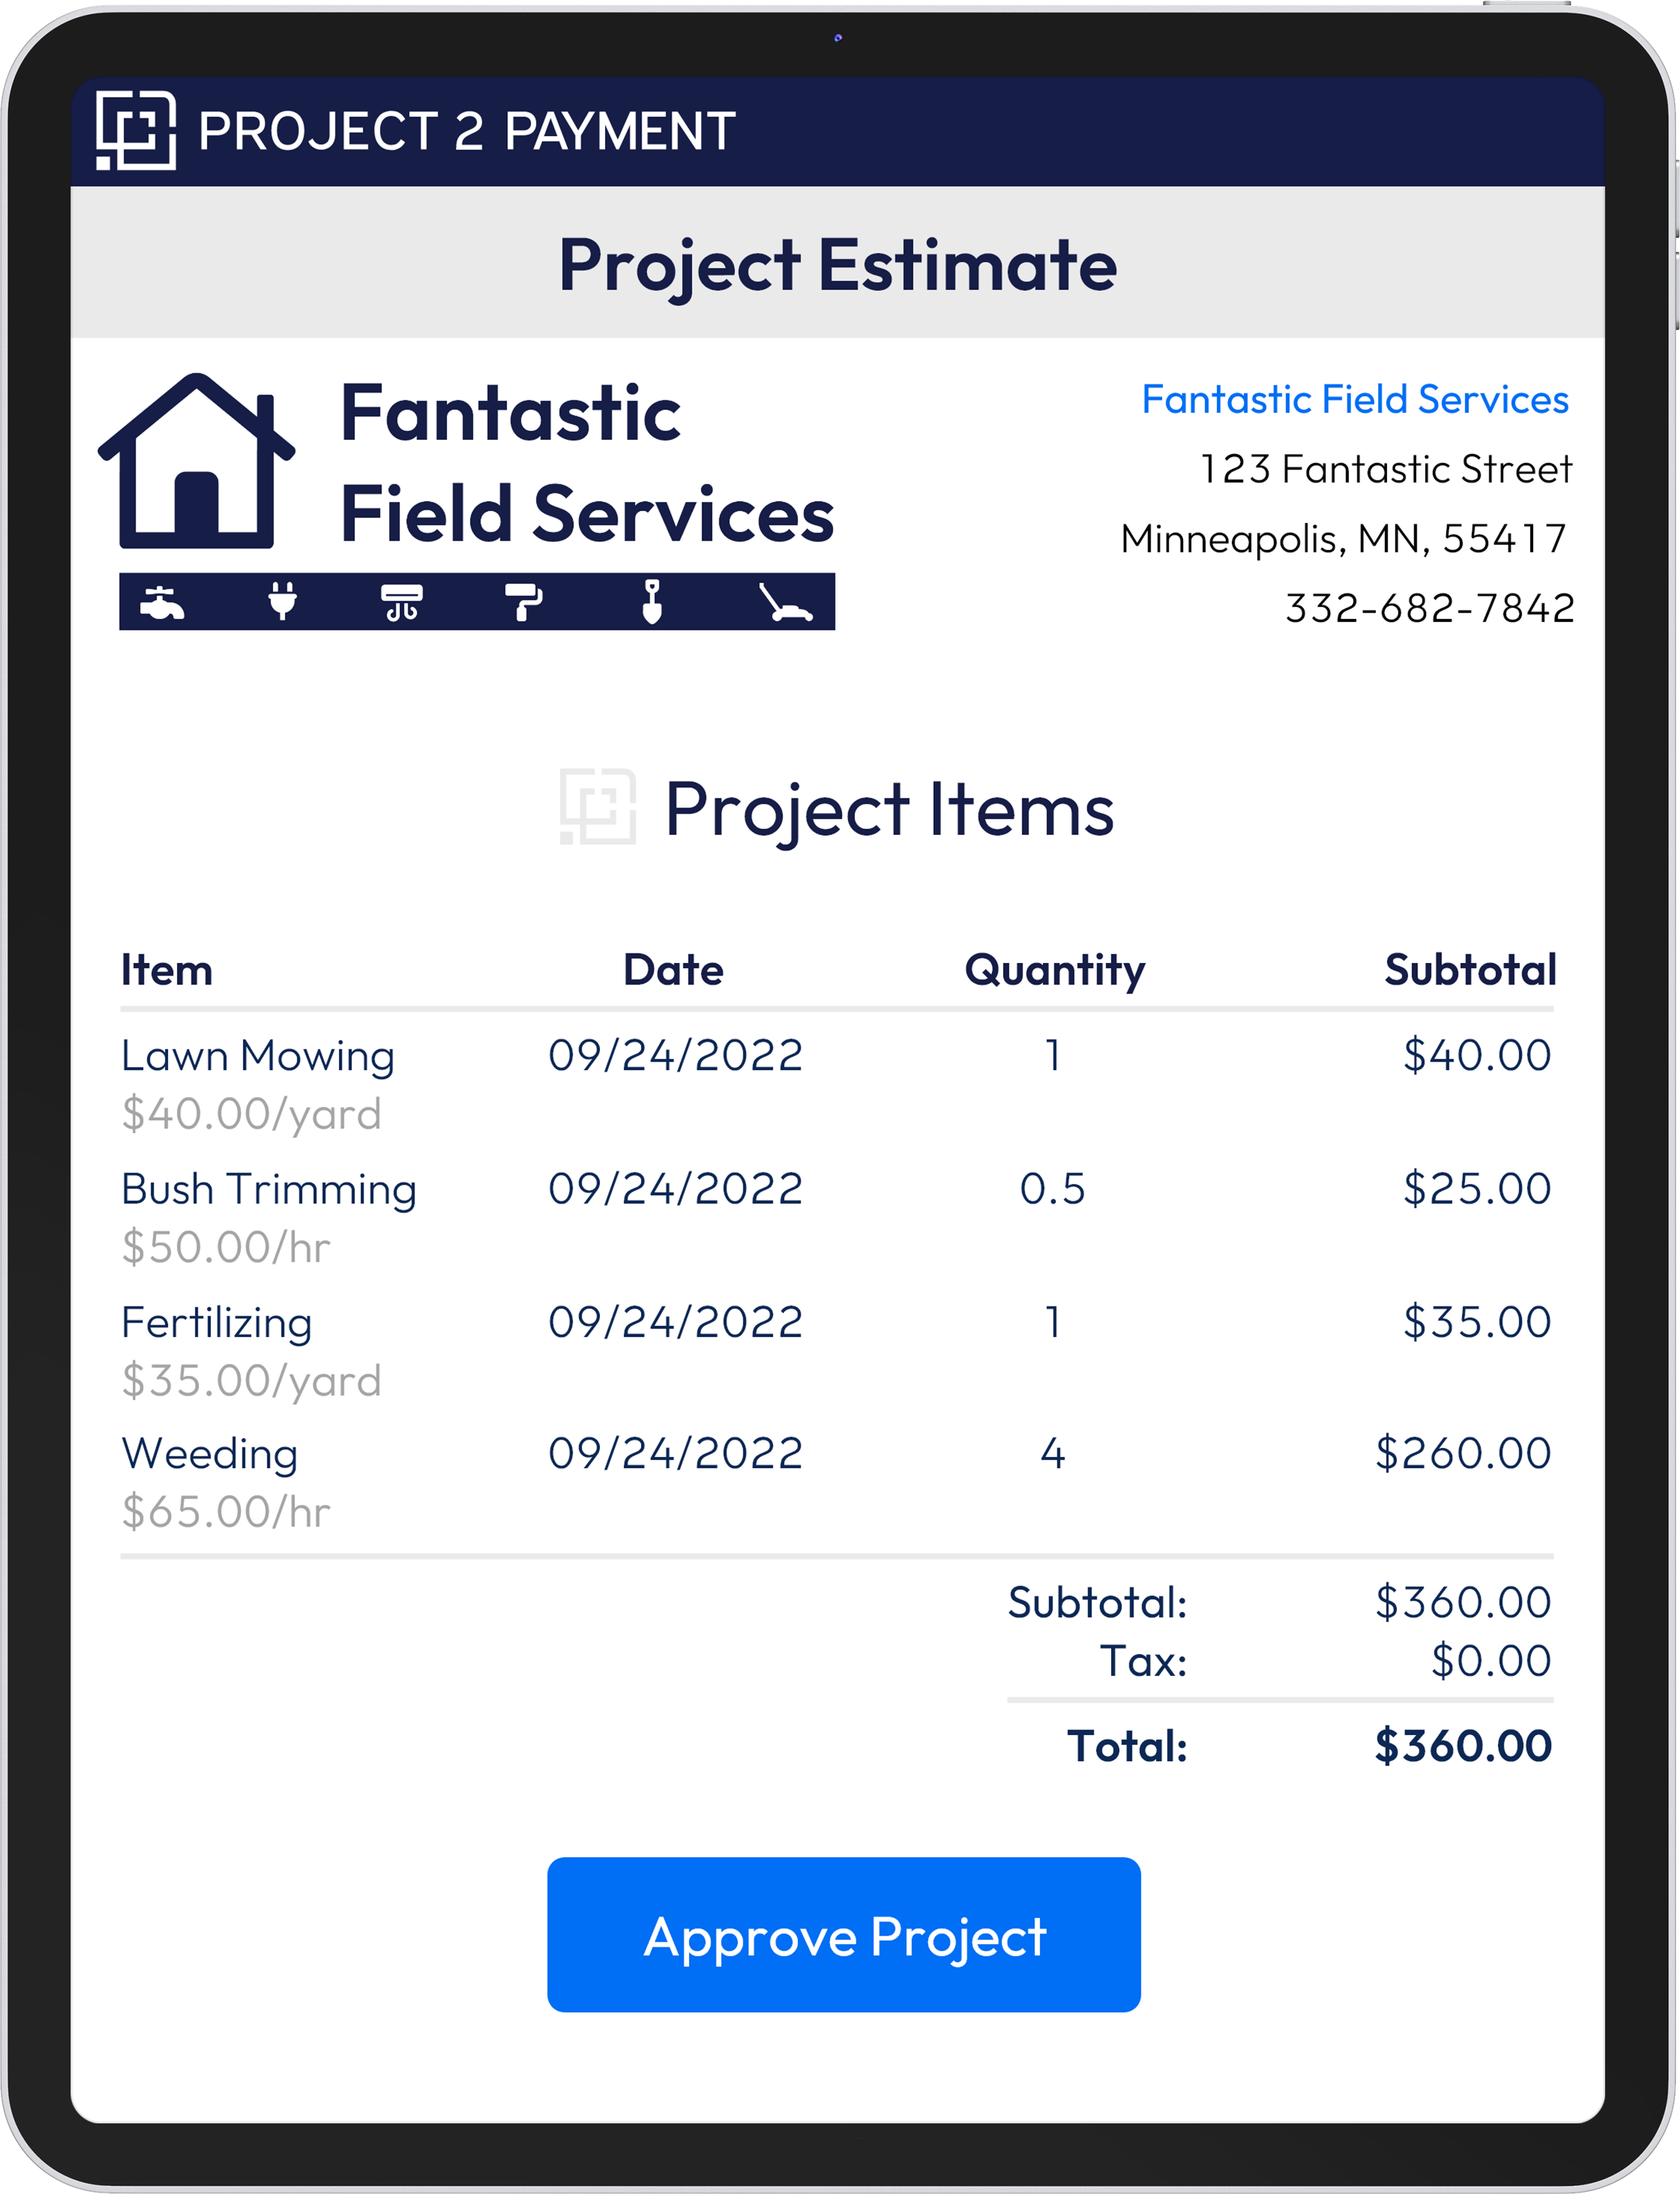 Easily create Project Estimates using your customizable Item Library within Project 2 Payment. Then send the estimate electronically to your customer for approval and/or for down payment.